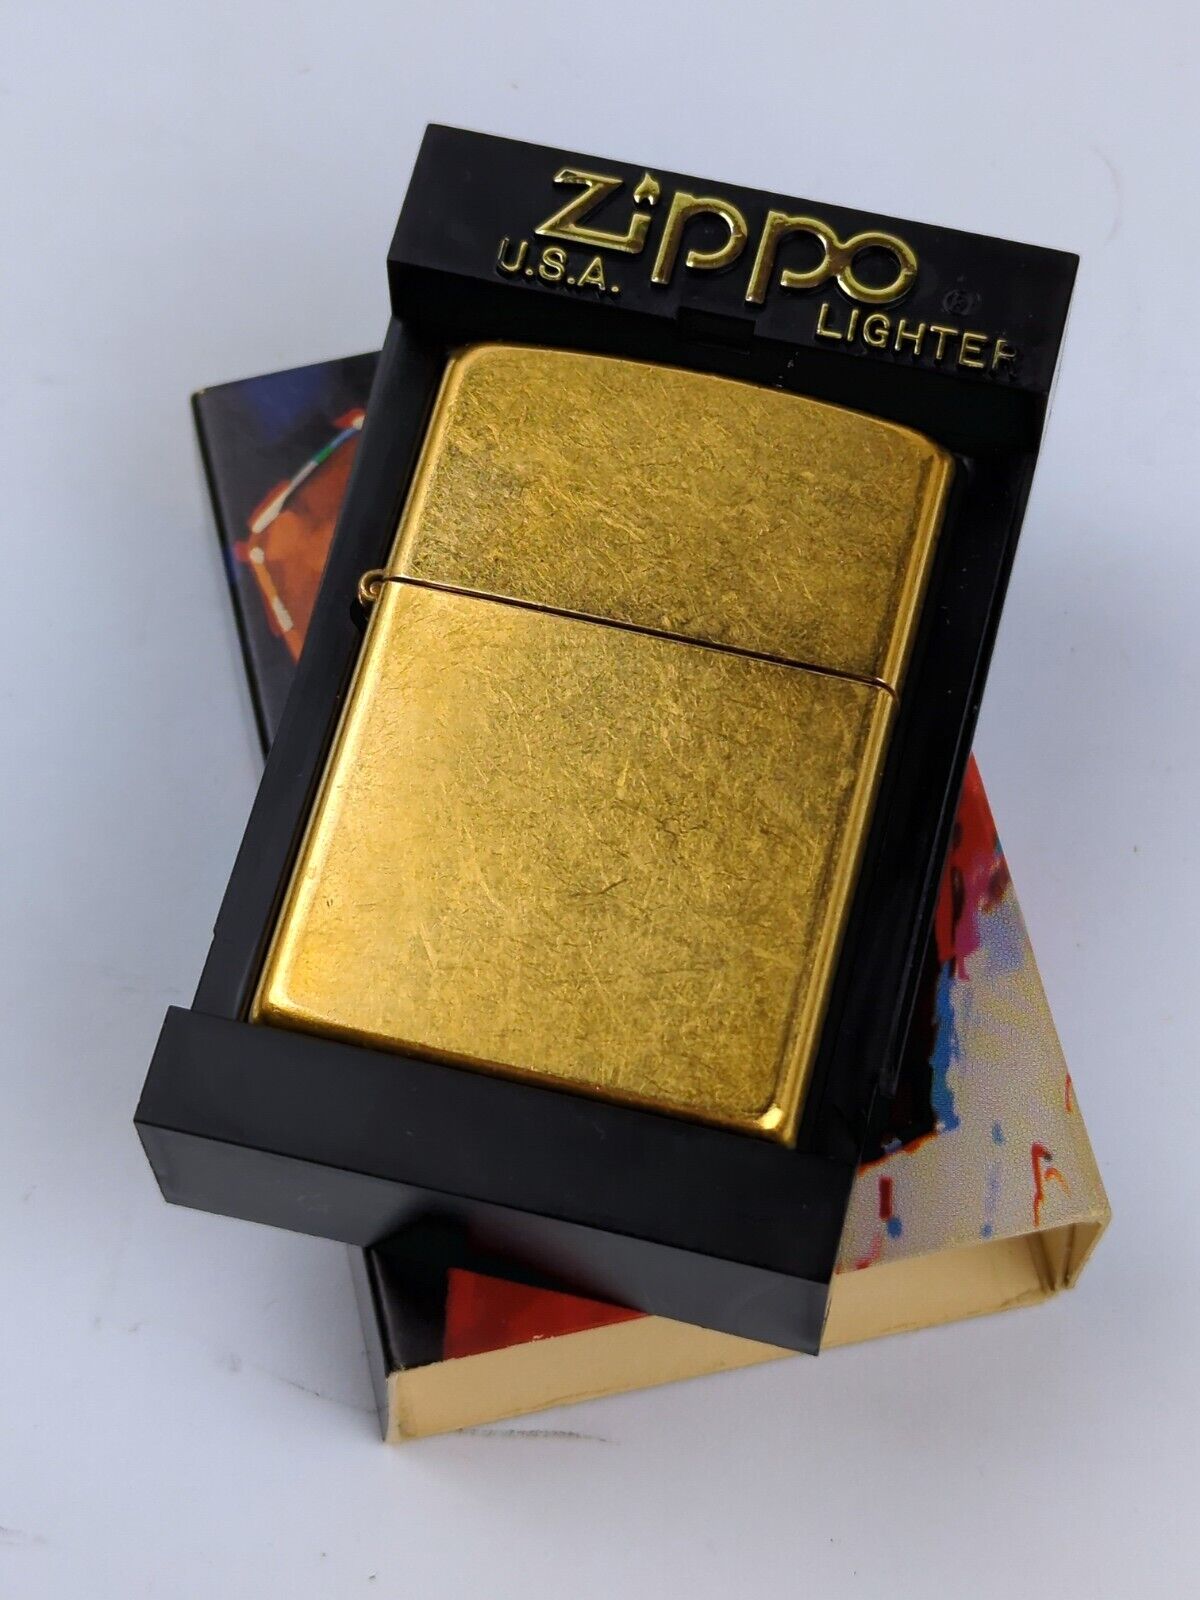 MARLBORO Gold Dust ZIPPO Lighter SEP (H) 2003 with Box Vintage, New Old Stock